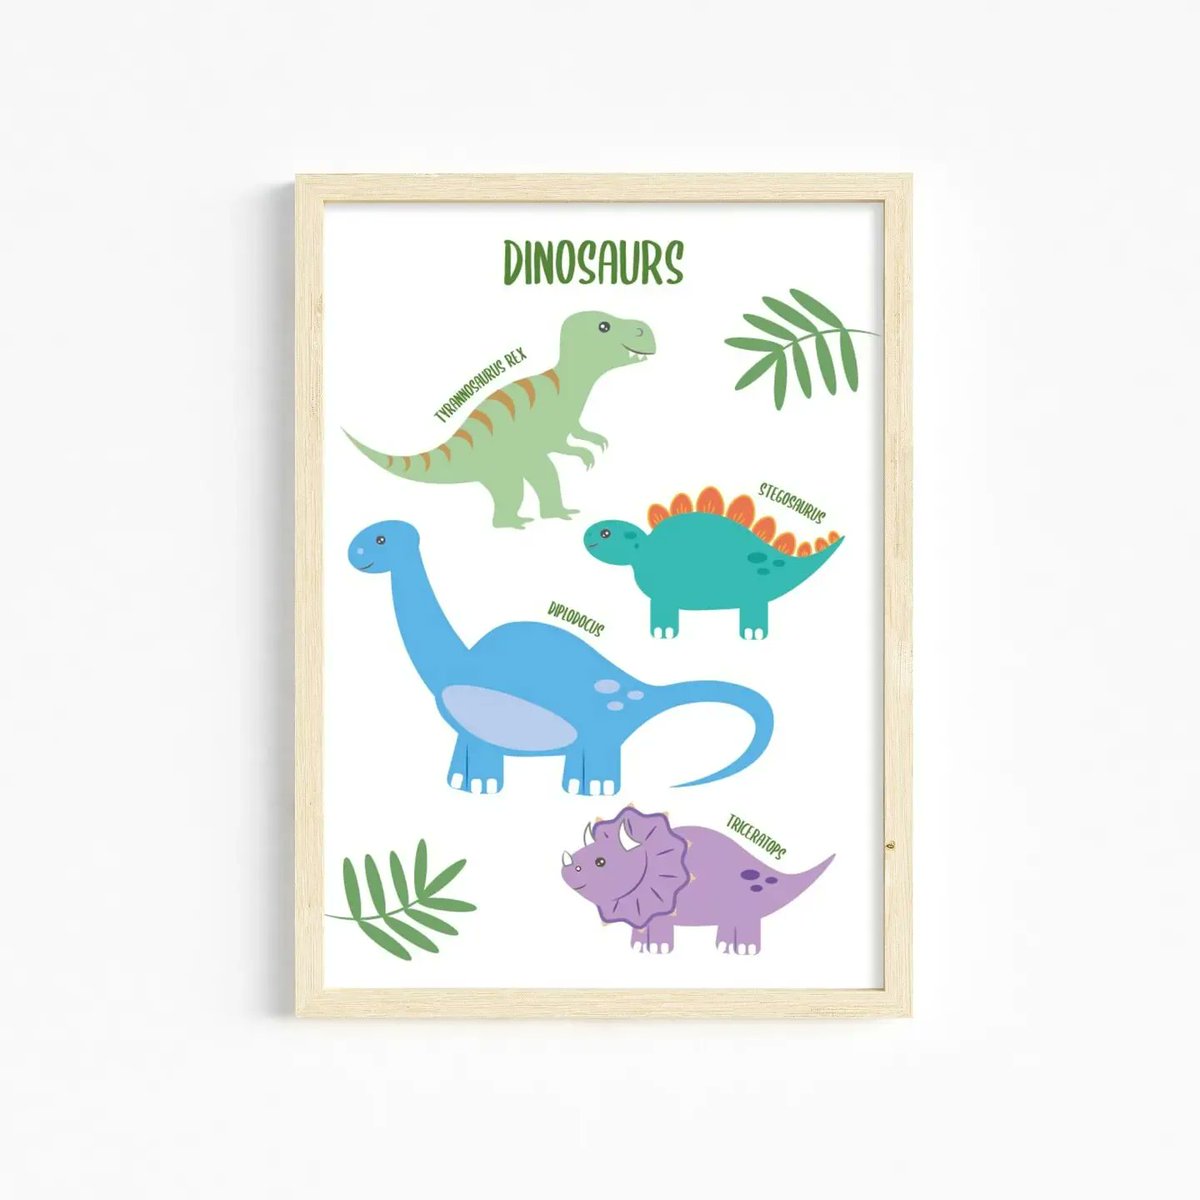 I have a special #fiverfriday offer on this cute dinosaur print today 🦖🦕
£5 with free shipping (usually £10)

andrealemindesign.etsy.com

#earlybiz #dinosaur #nurserydecor #fridaymorning